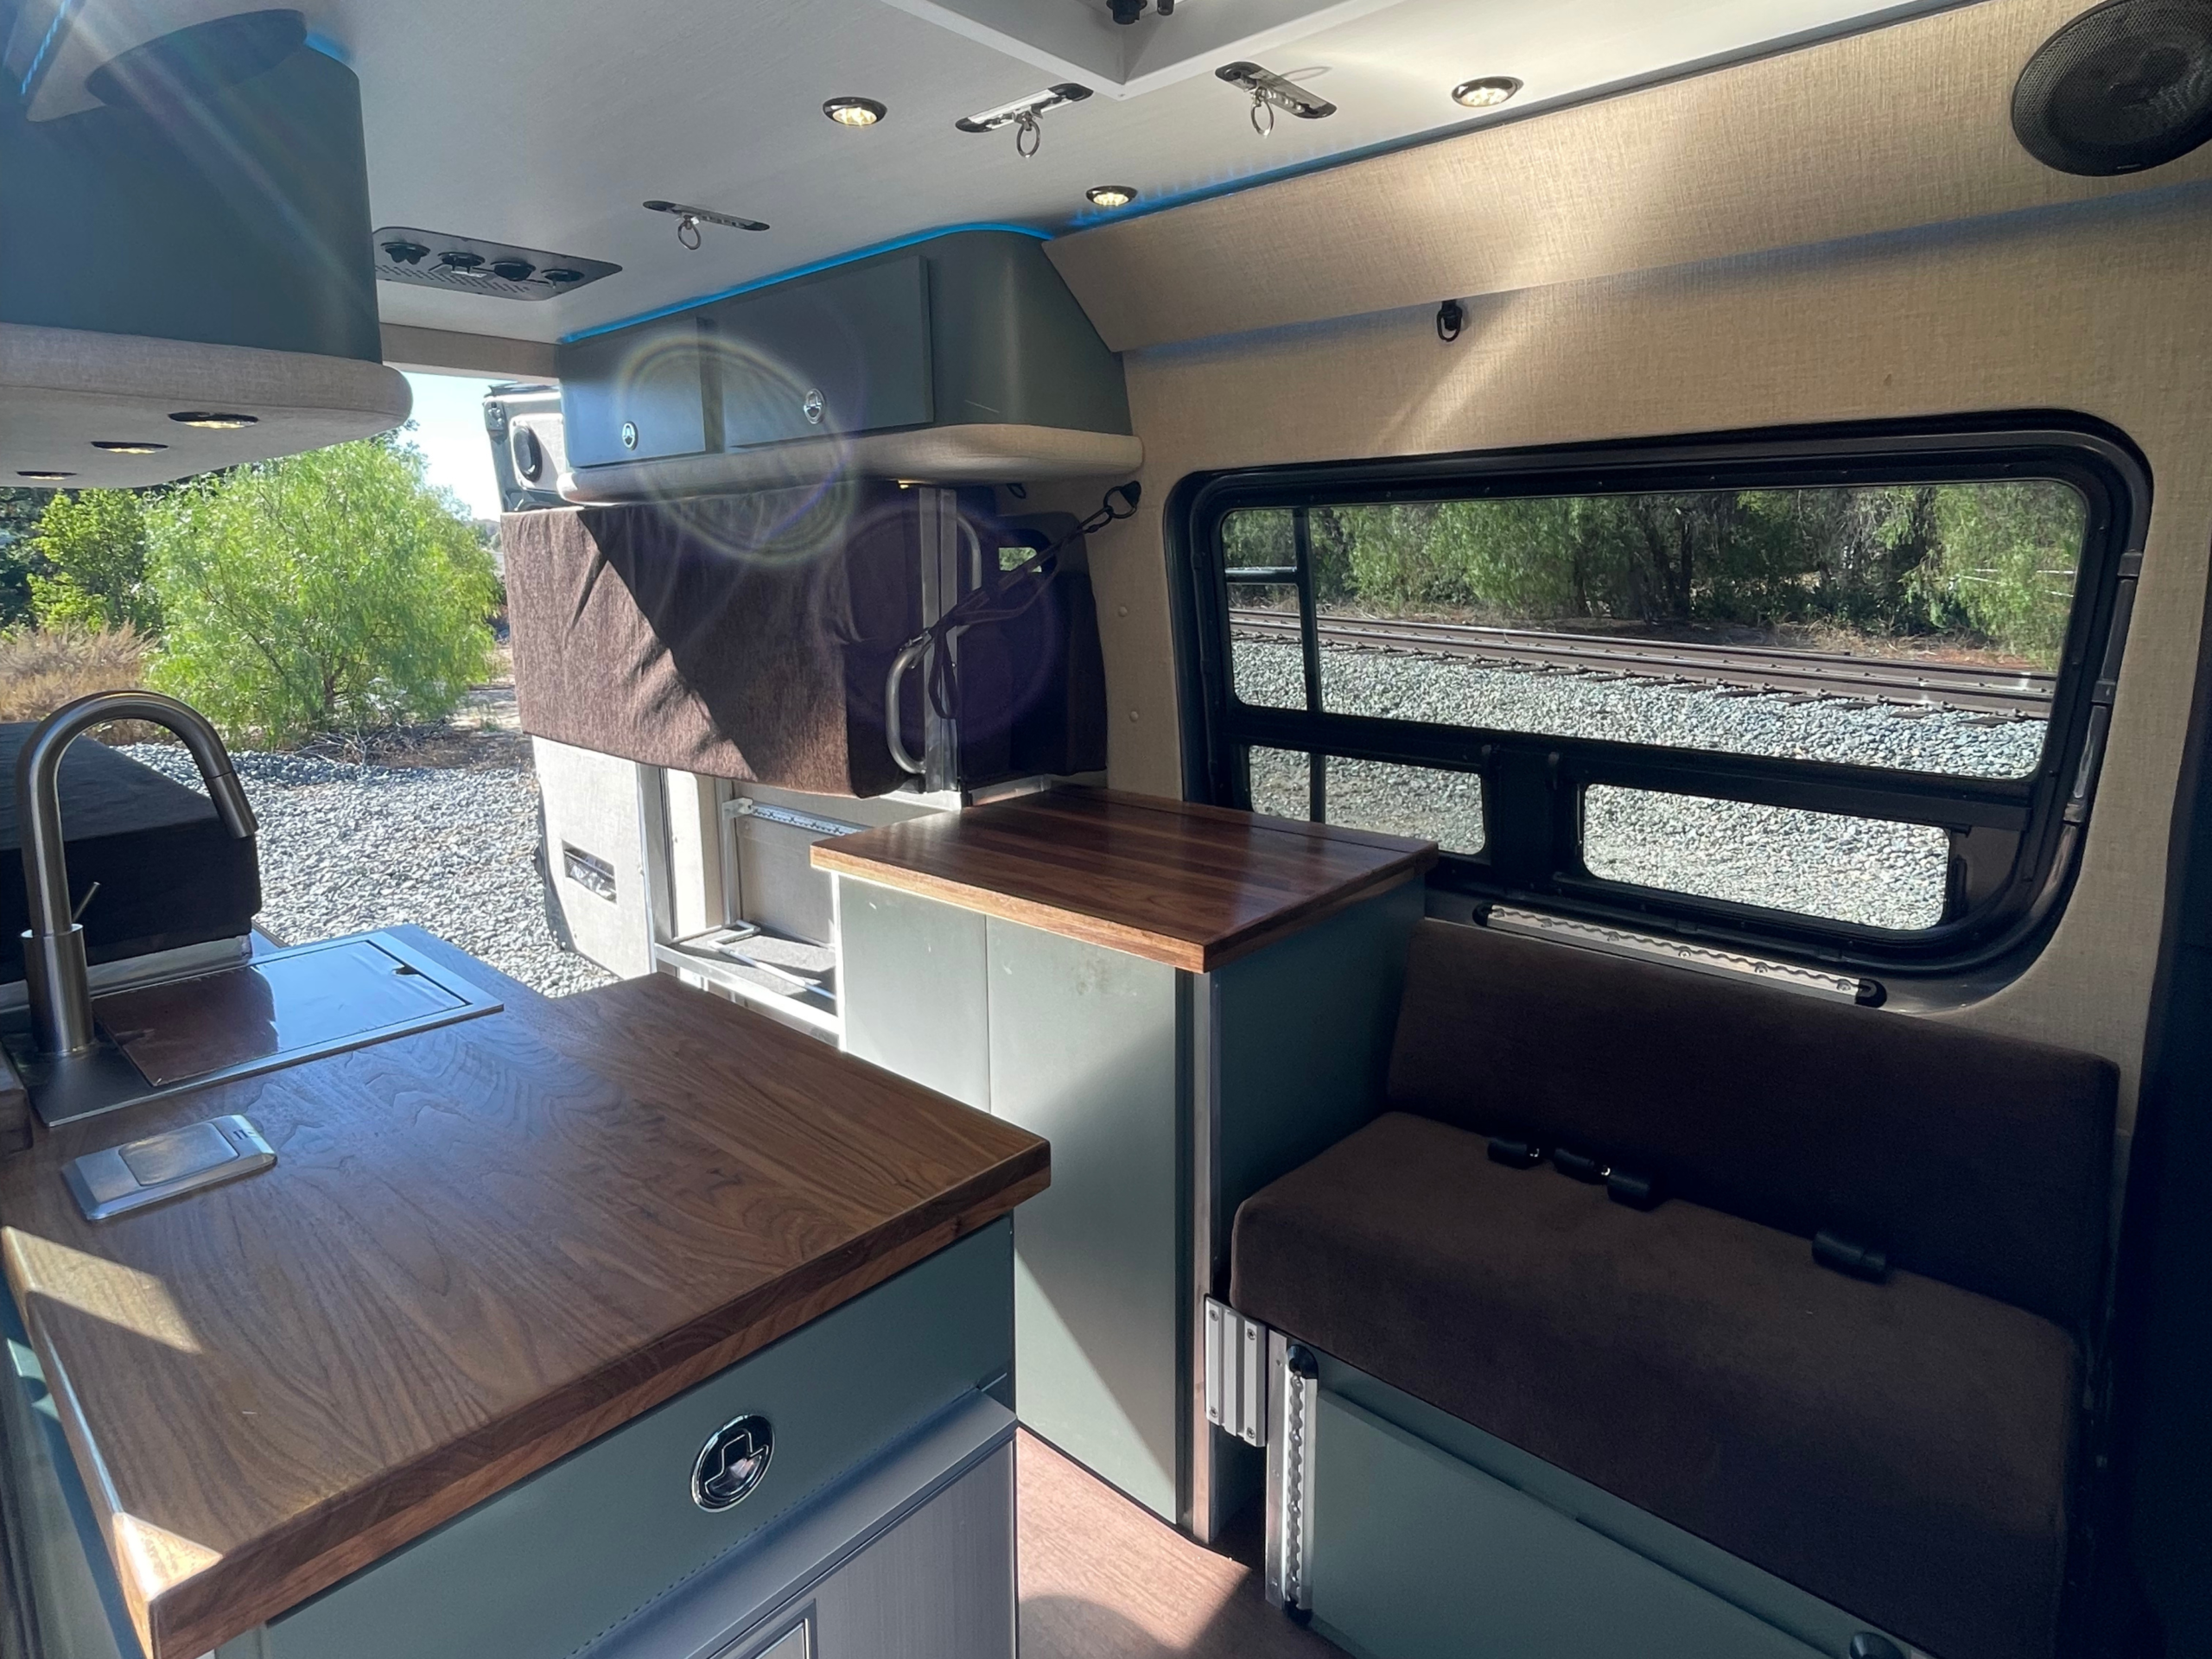 the interior of a campervan with a fridge, half shower, and pull down bed in the back